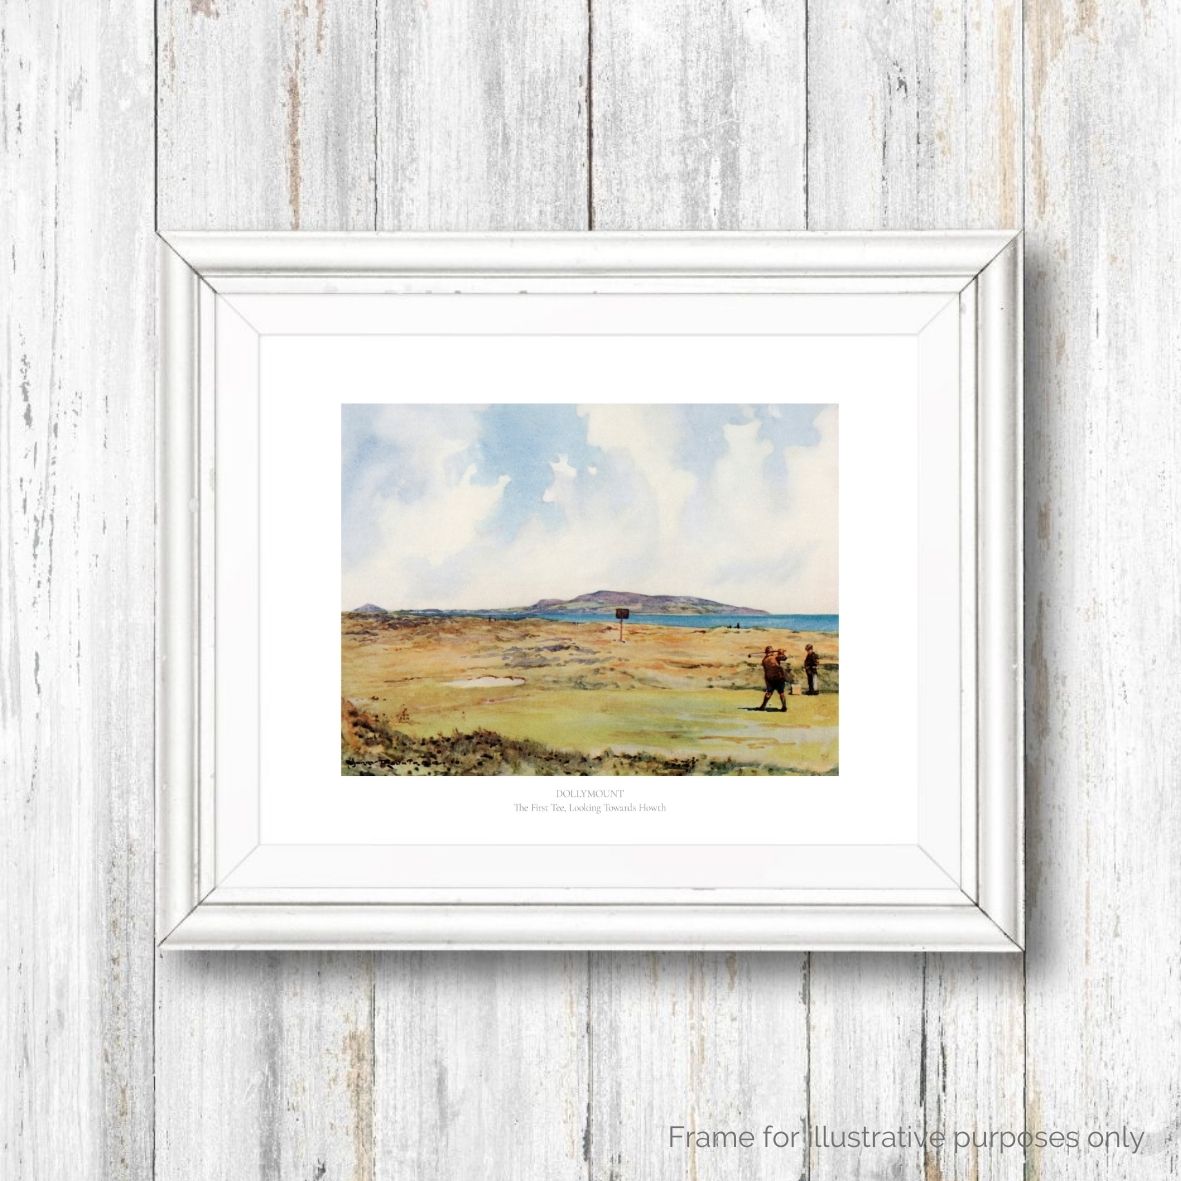 Royal Dublin Golf Club framed print with text by Harry Rountree